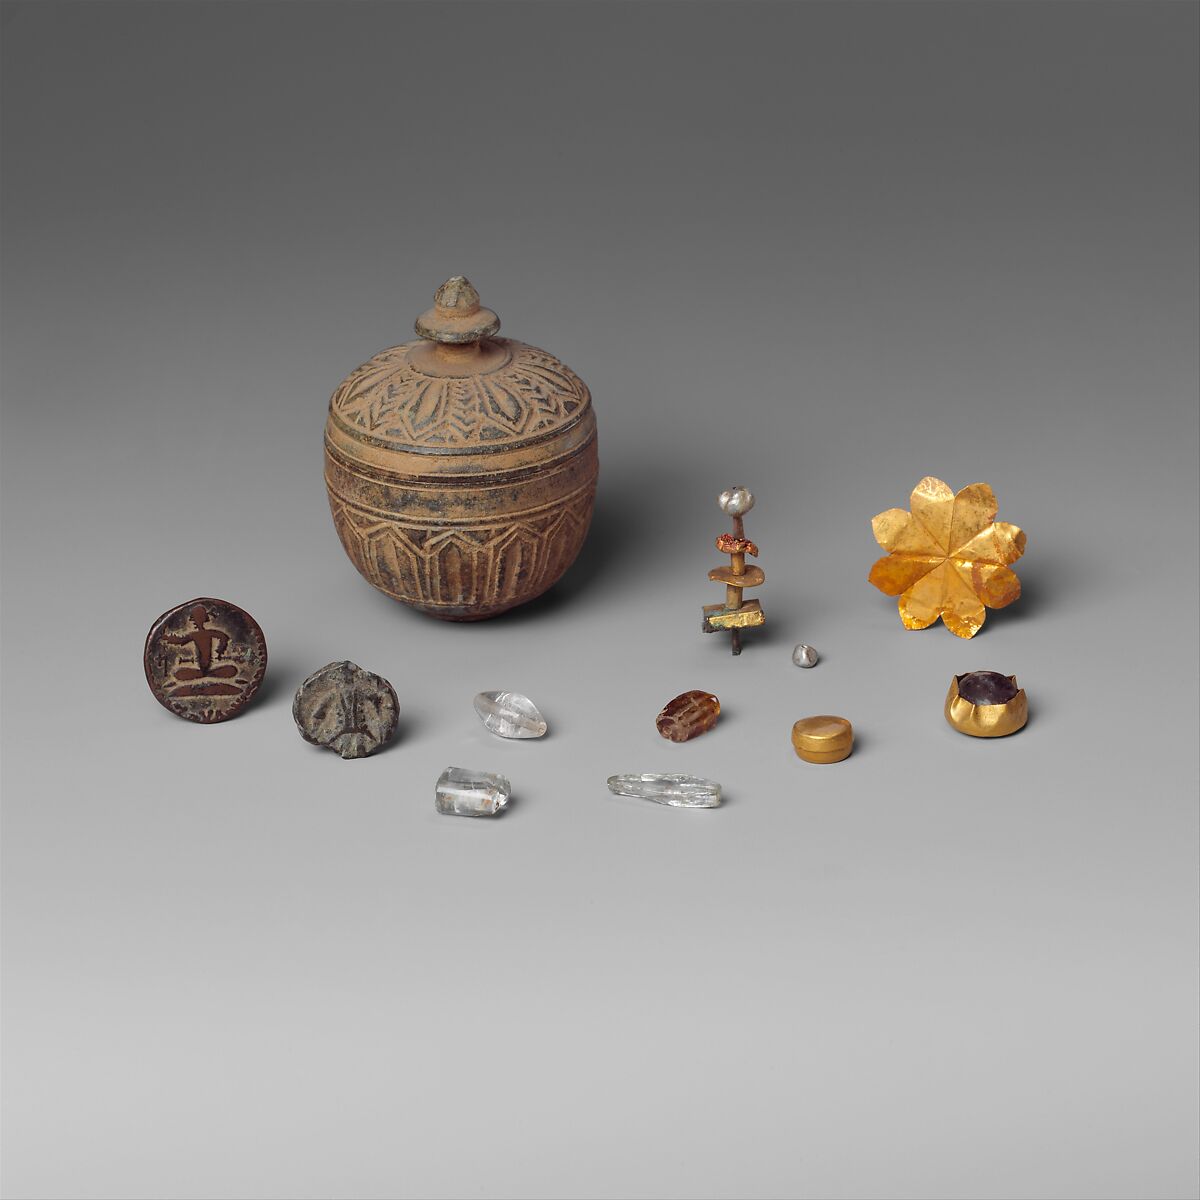 Reliquary with Contents, Schist with objects of copper, gold, rock crystal, and pearl objects, Pakistan (ancient region of Gandhara)